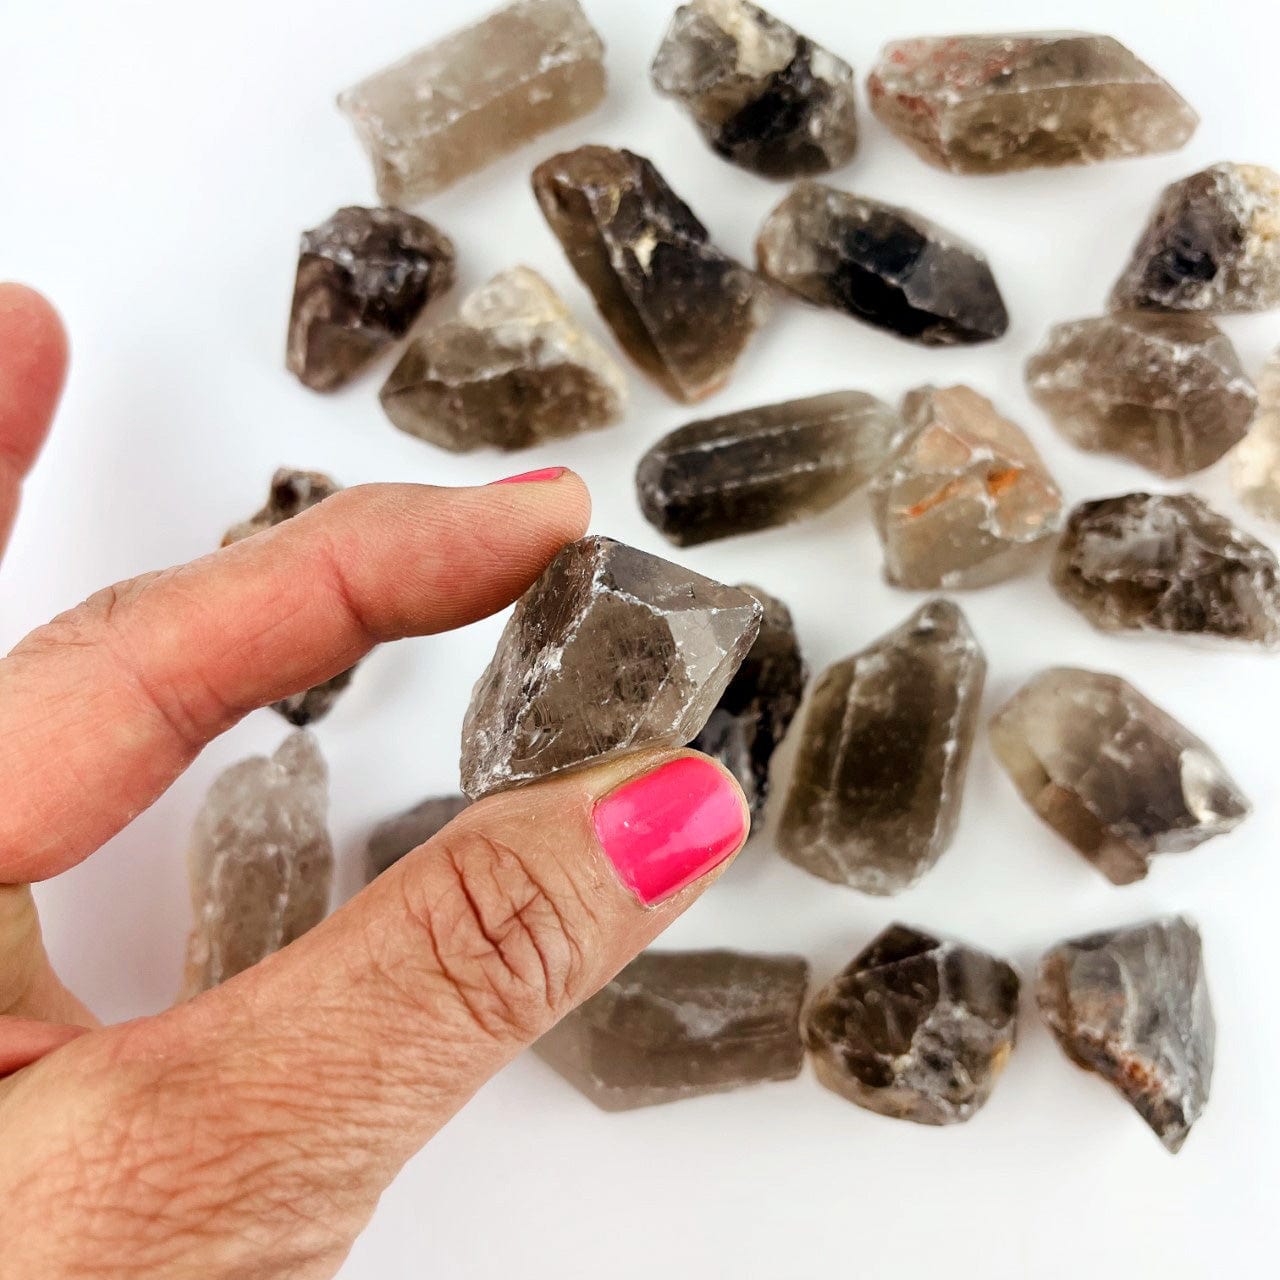 Smoky Quartz Natural Stone in a hand for size